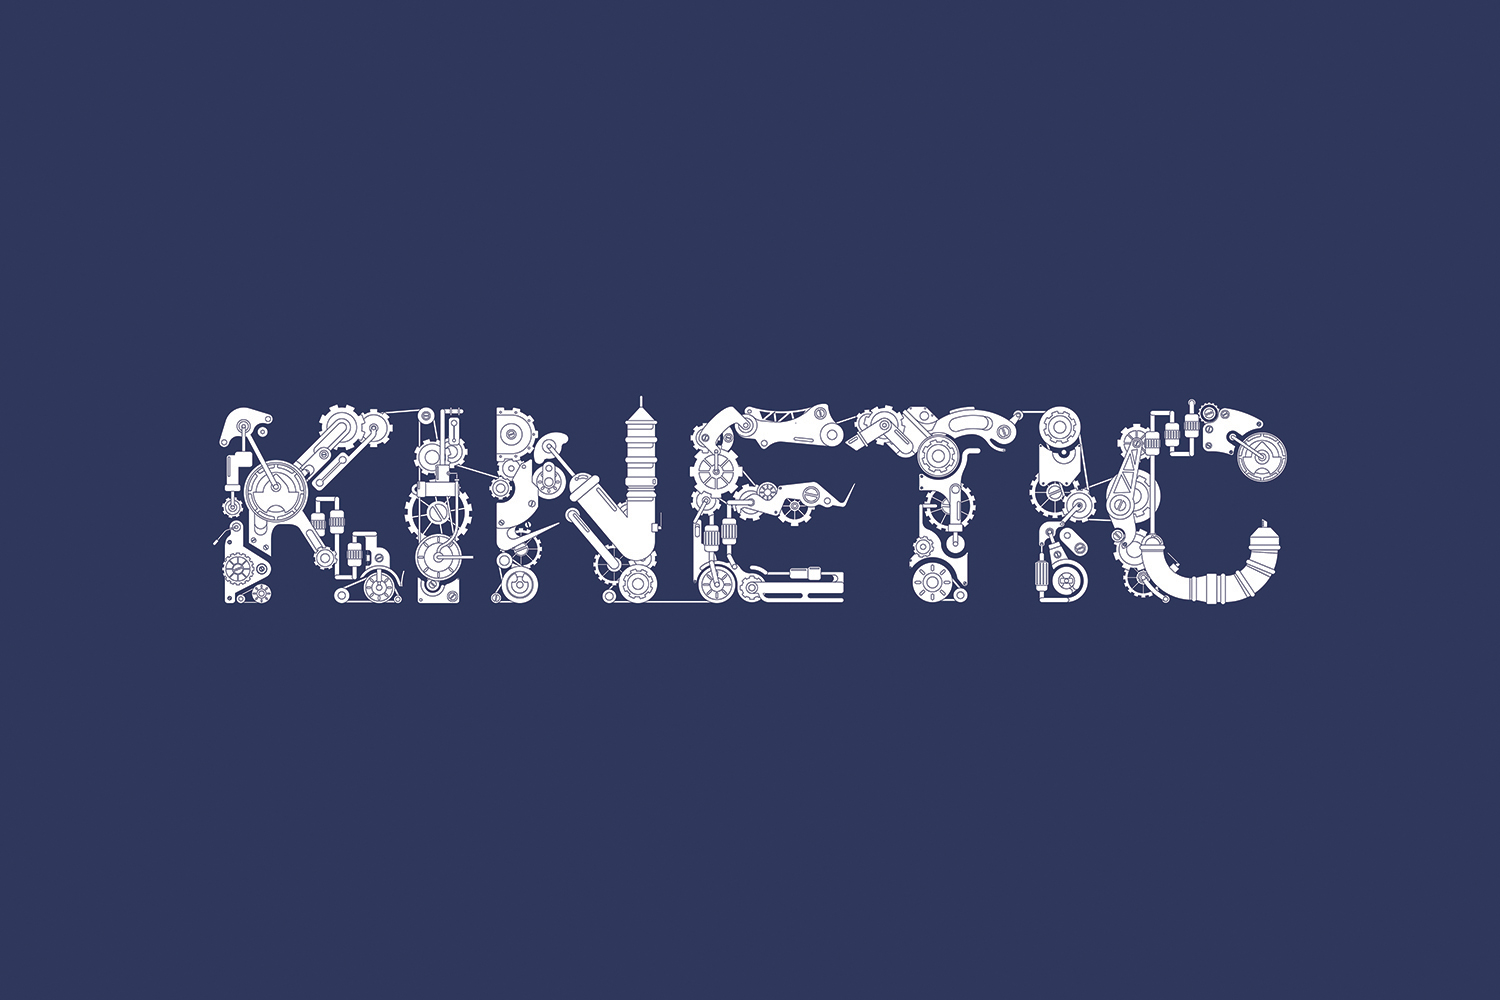 the word kinetic made of objects